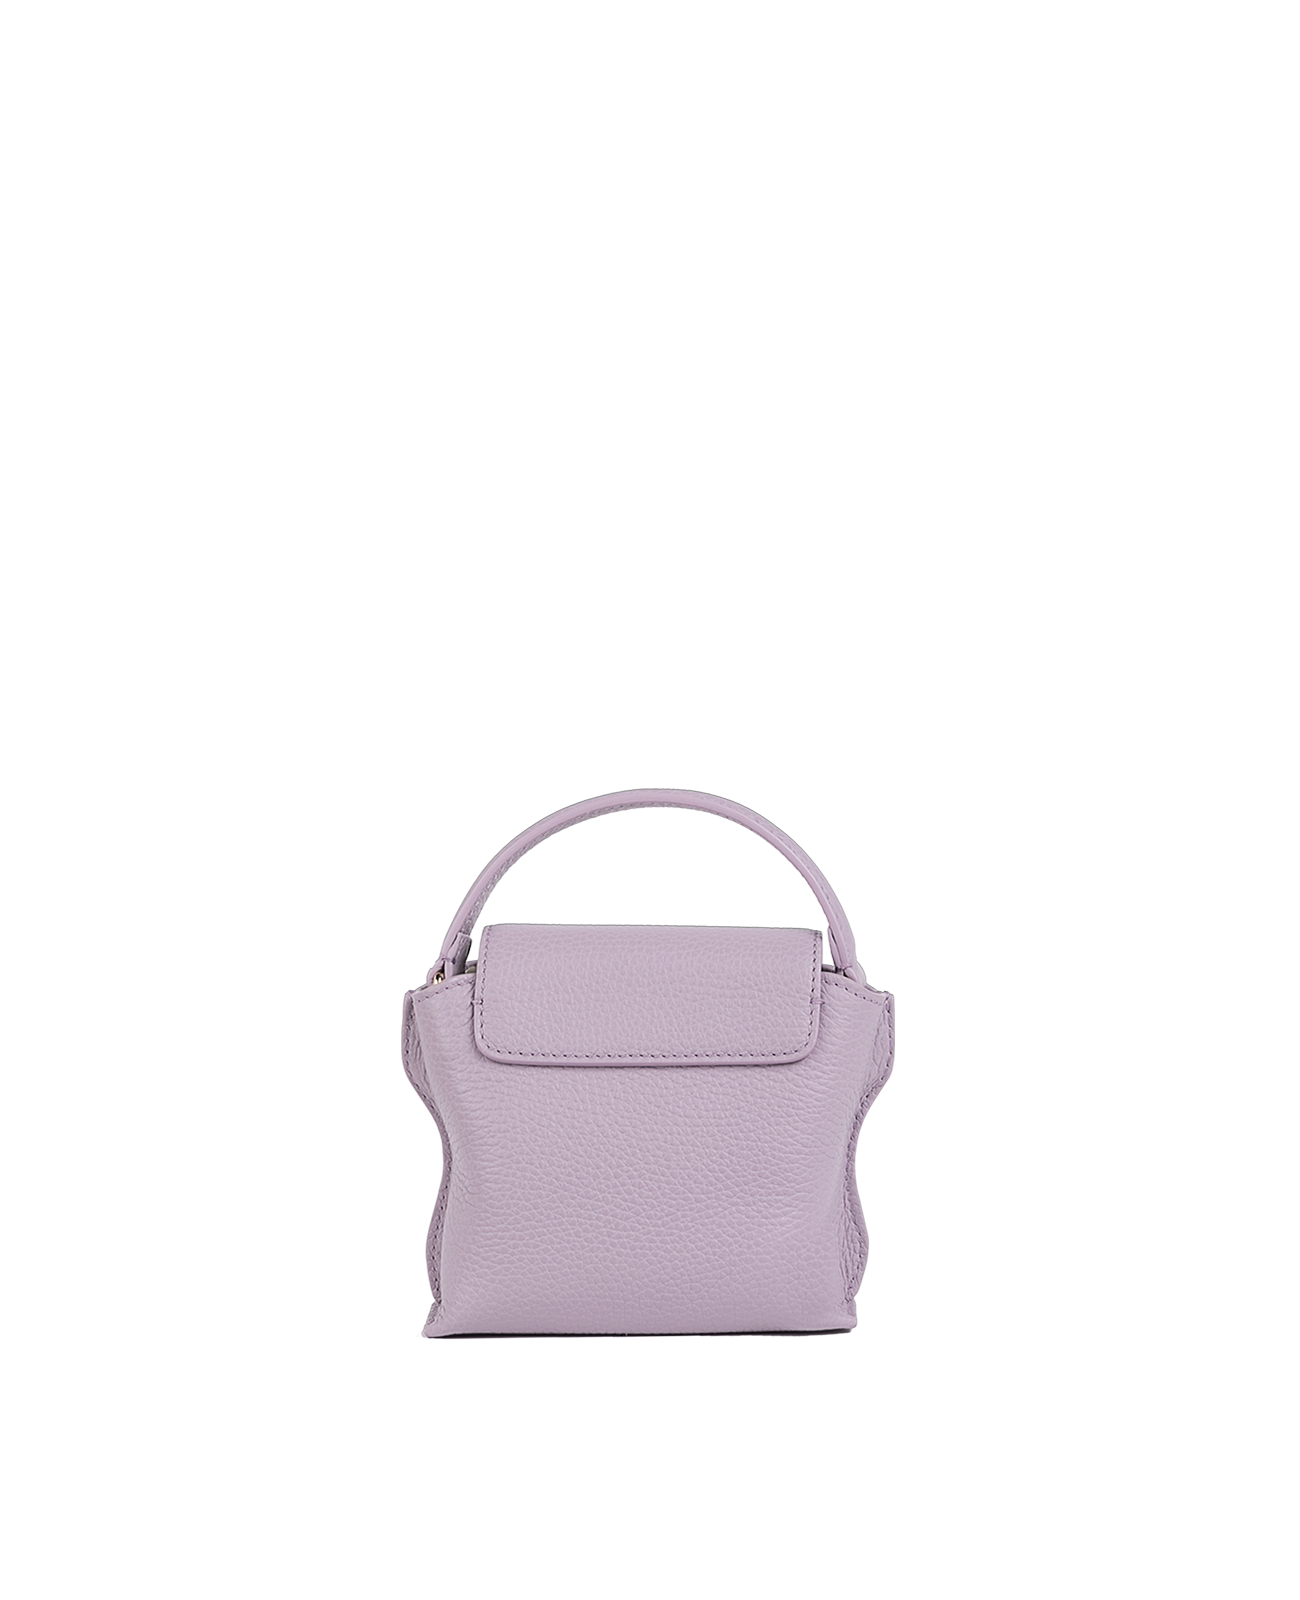 Cross-body bag in Italian full-grain leather, semi-aniline calf Italian leather with detachable shoulder strap.Three compartments, zip pocket in the back compartment. Magnetic flap closure with logo. Color: Lavender. Size:Mini